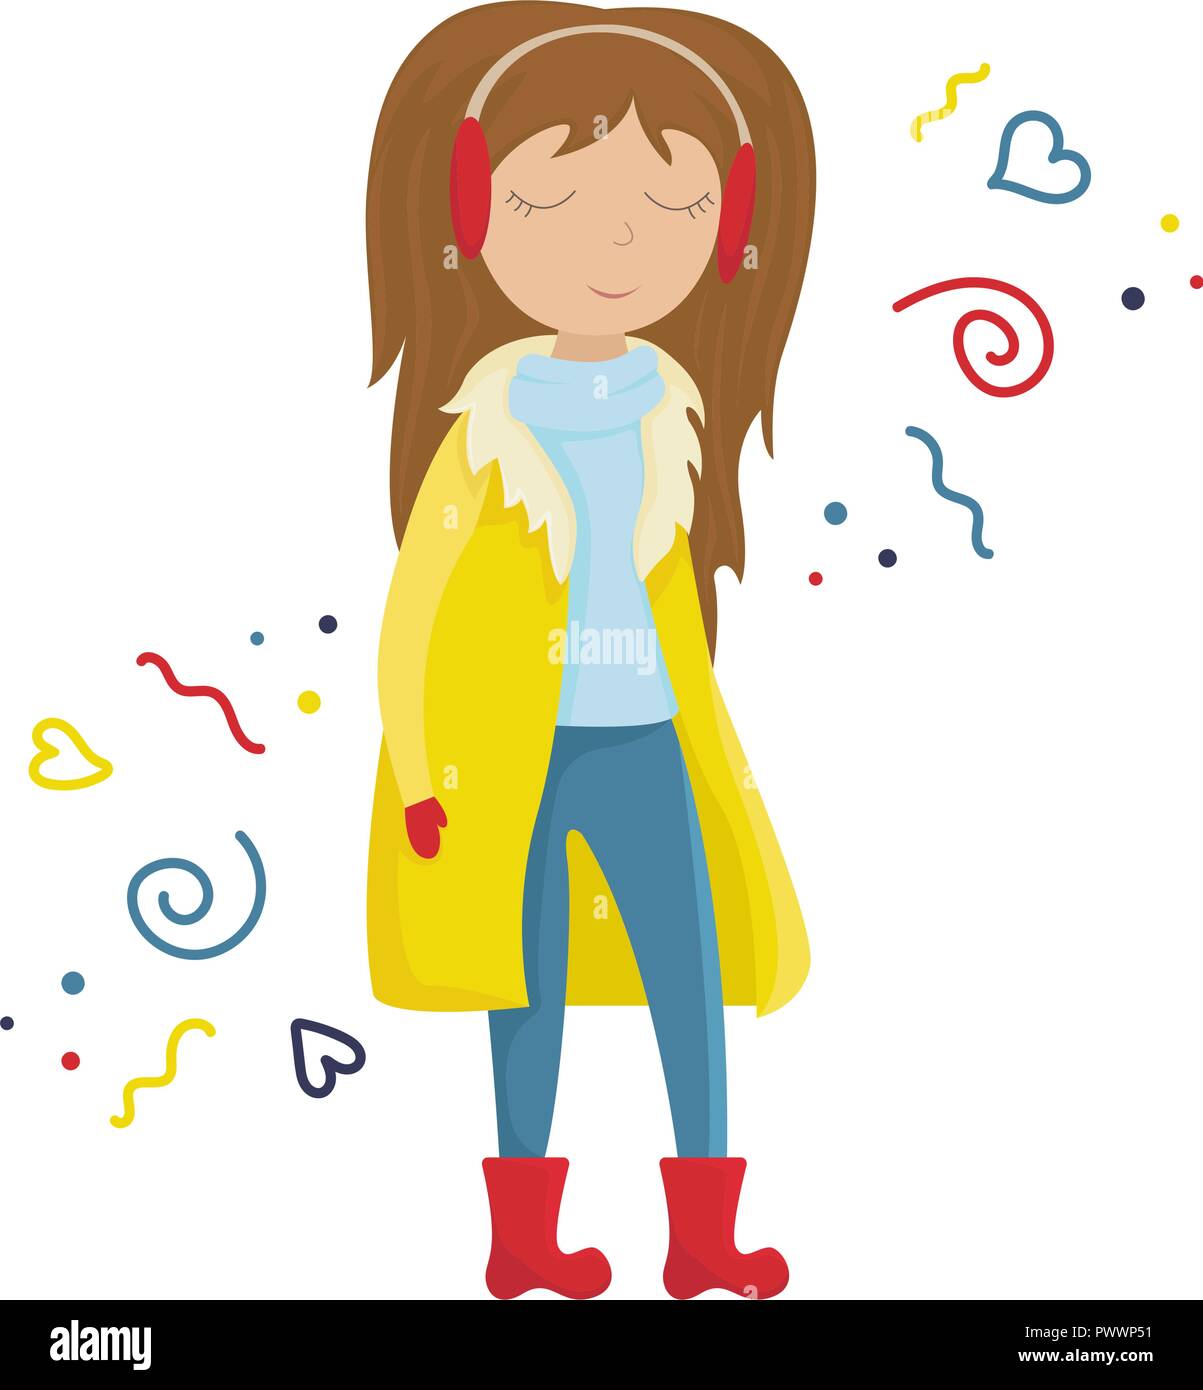 Girl in a yellow winter coat. Flat winter vector illustration with doodles. Stock Vector